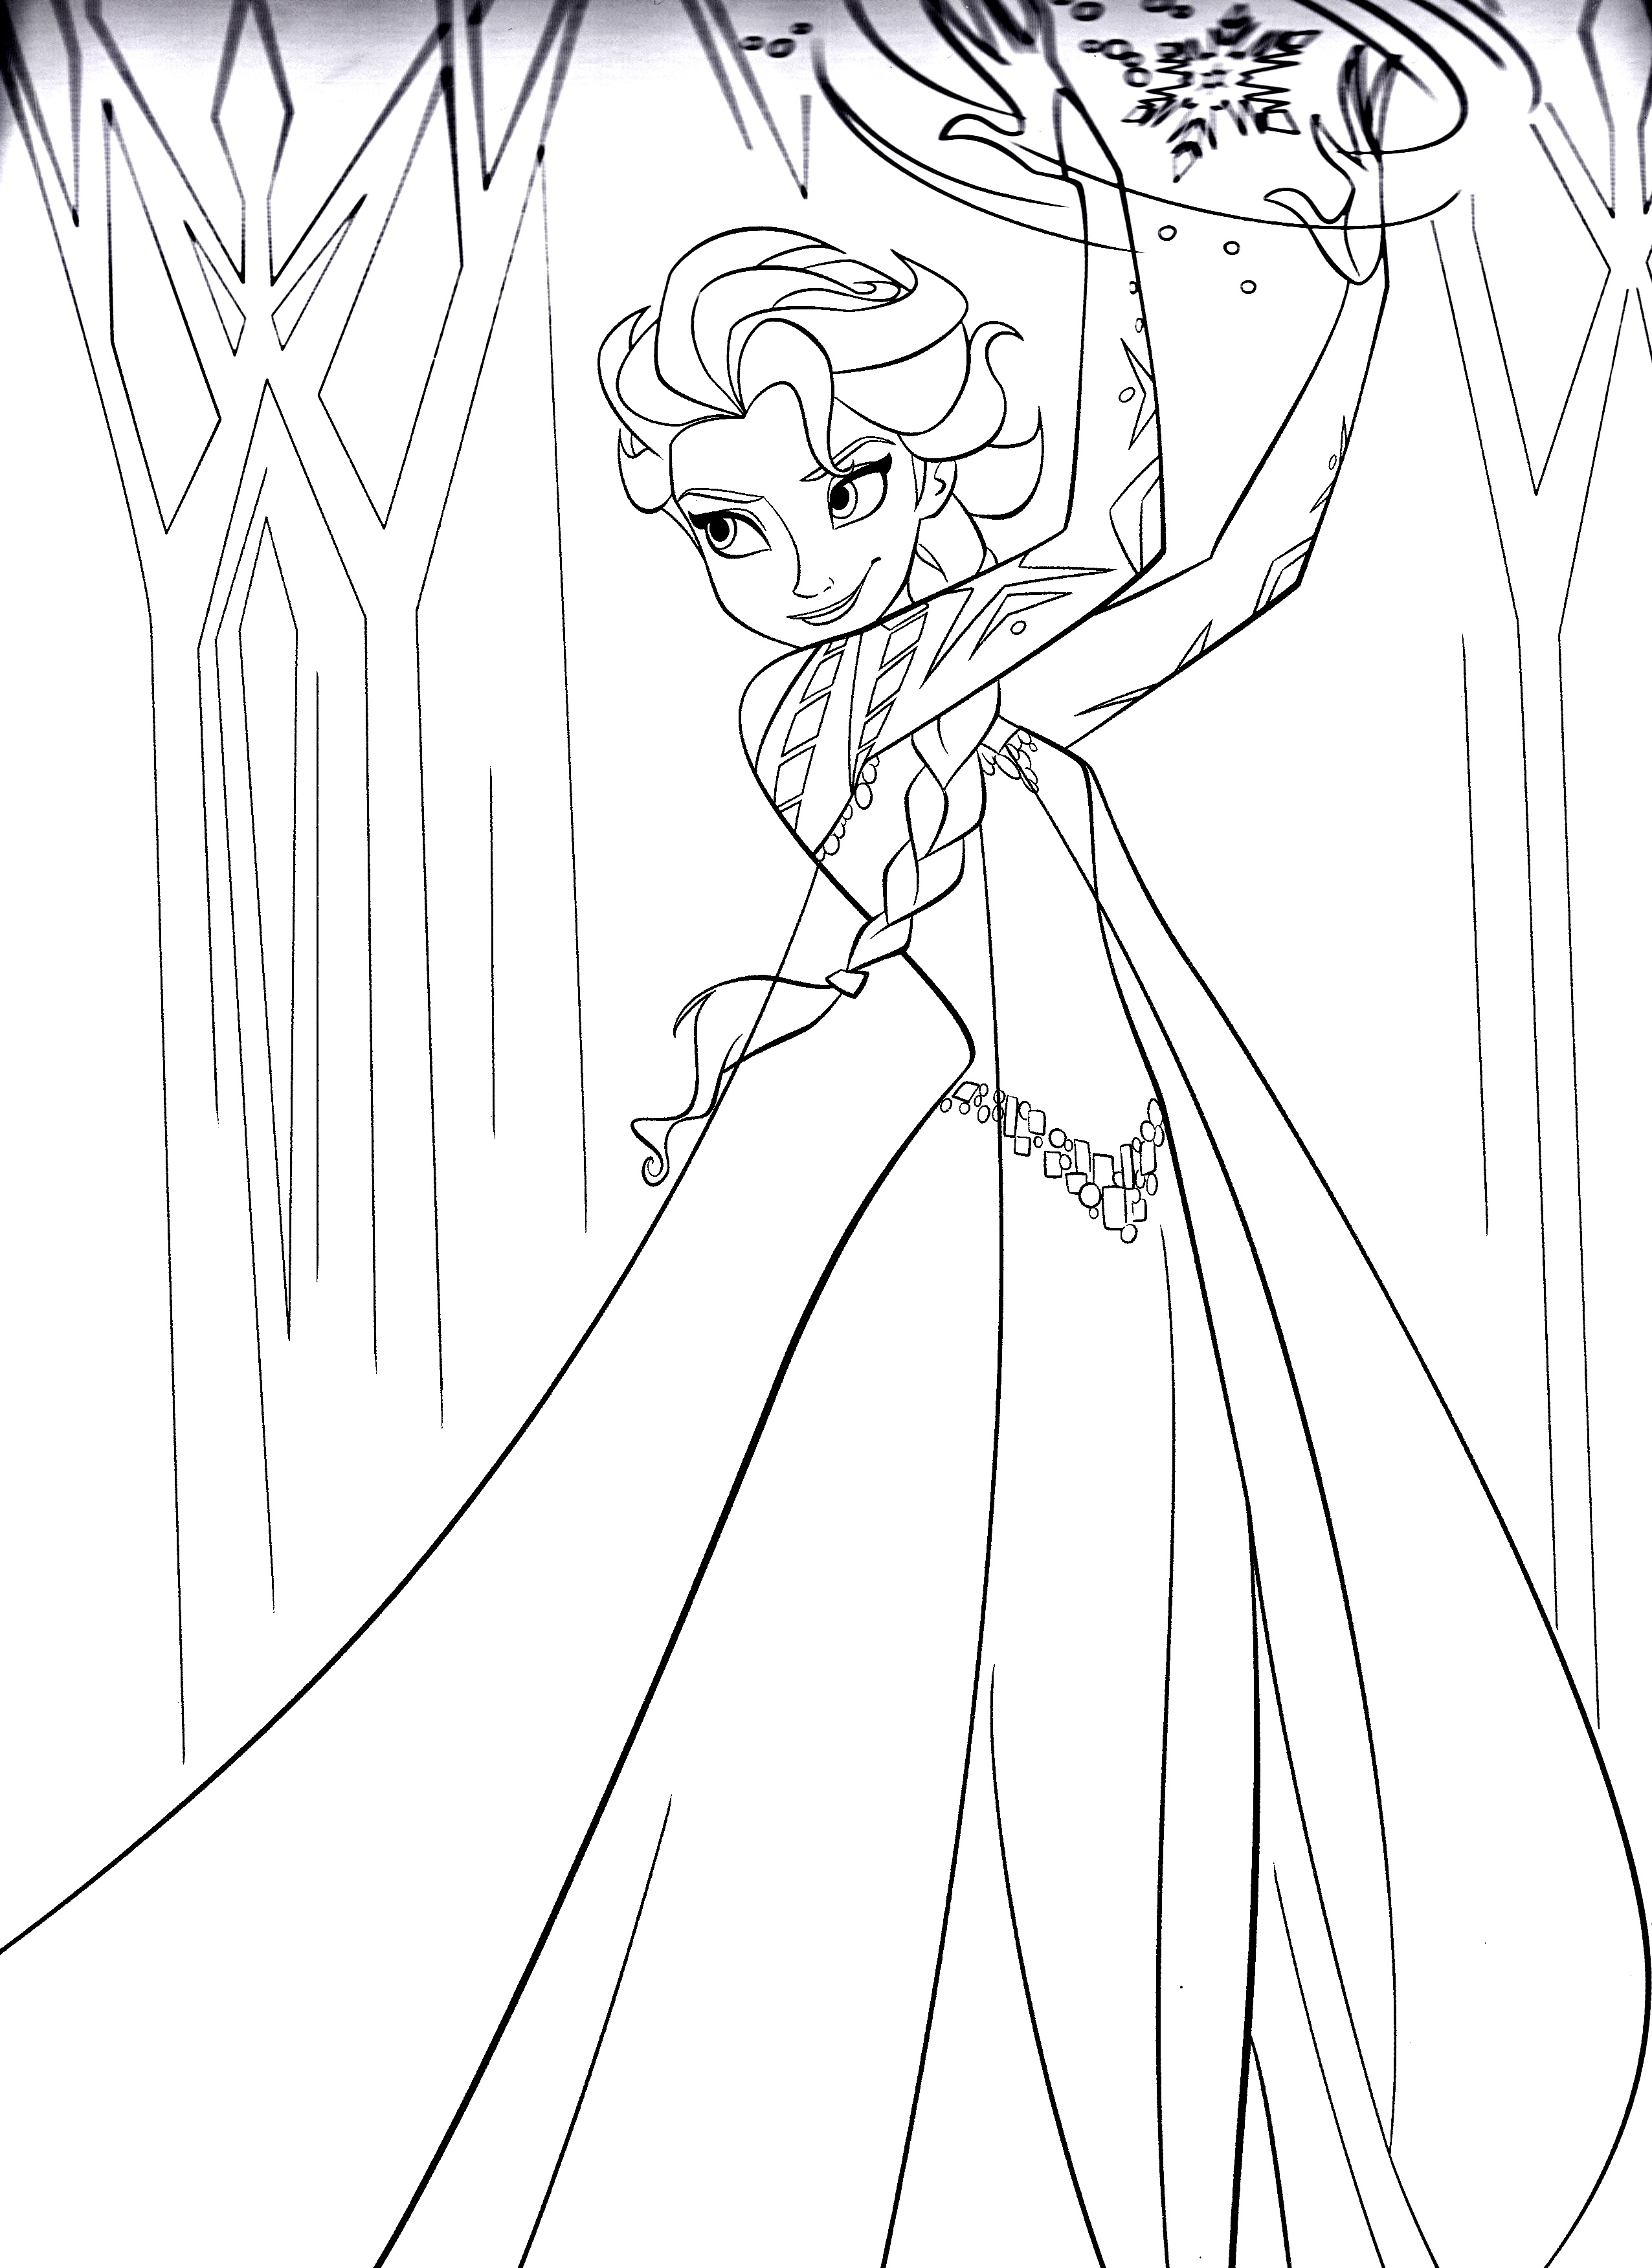 Printable Frozen coloring page to print and color for free : Elsa has incredible powers